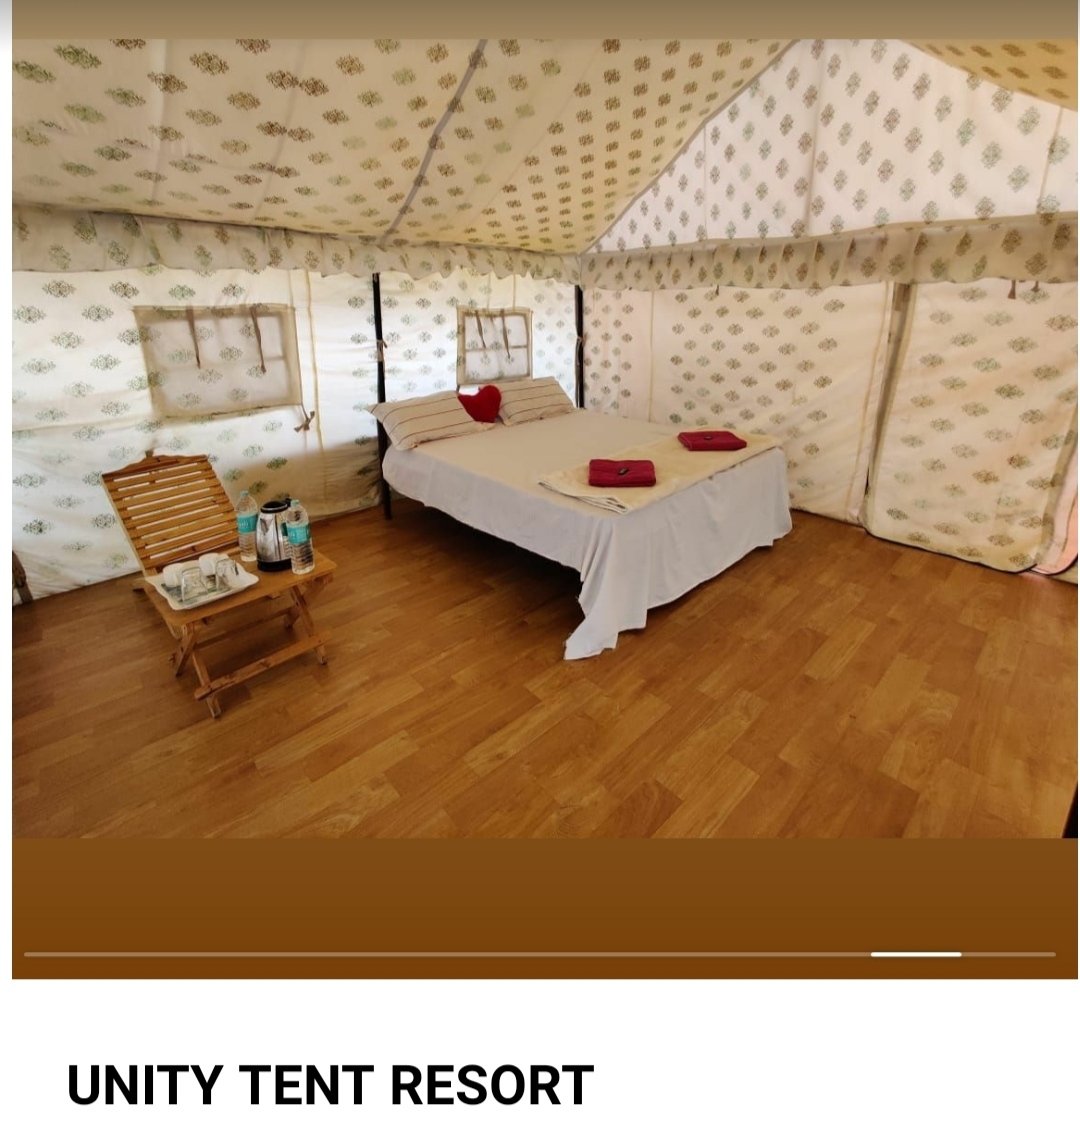 <span  class="uc_style_uc_tiles_grid_image_elementor_uc_items_attribute_title" style="color:#ffffff;">Unity Tent  Resort Room Image</span>